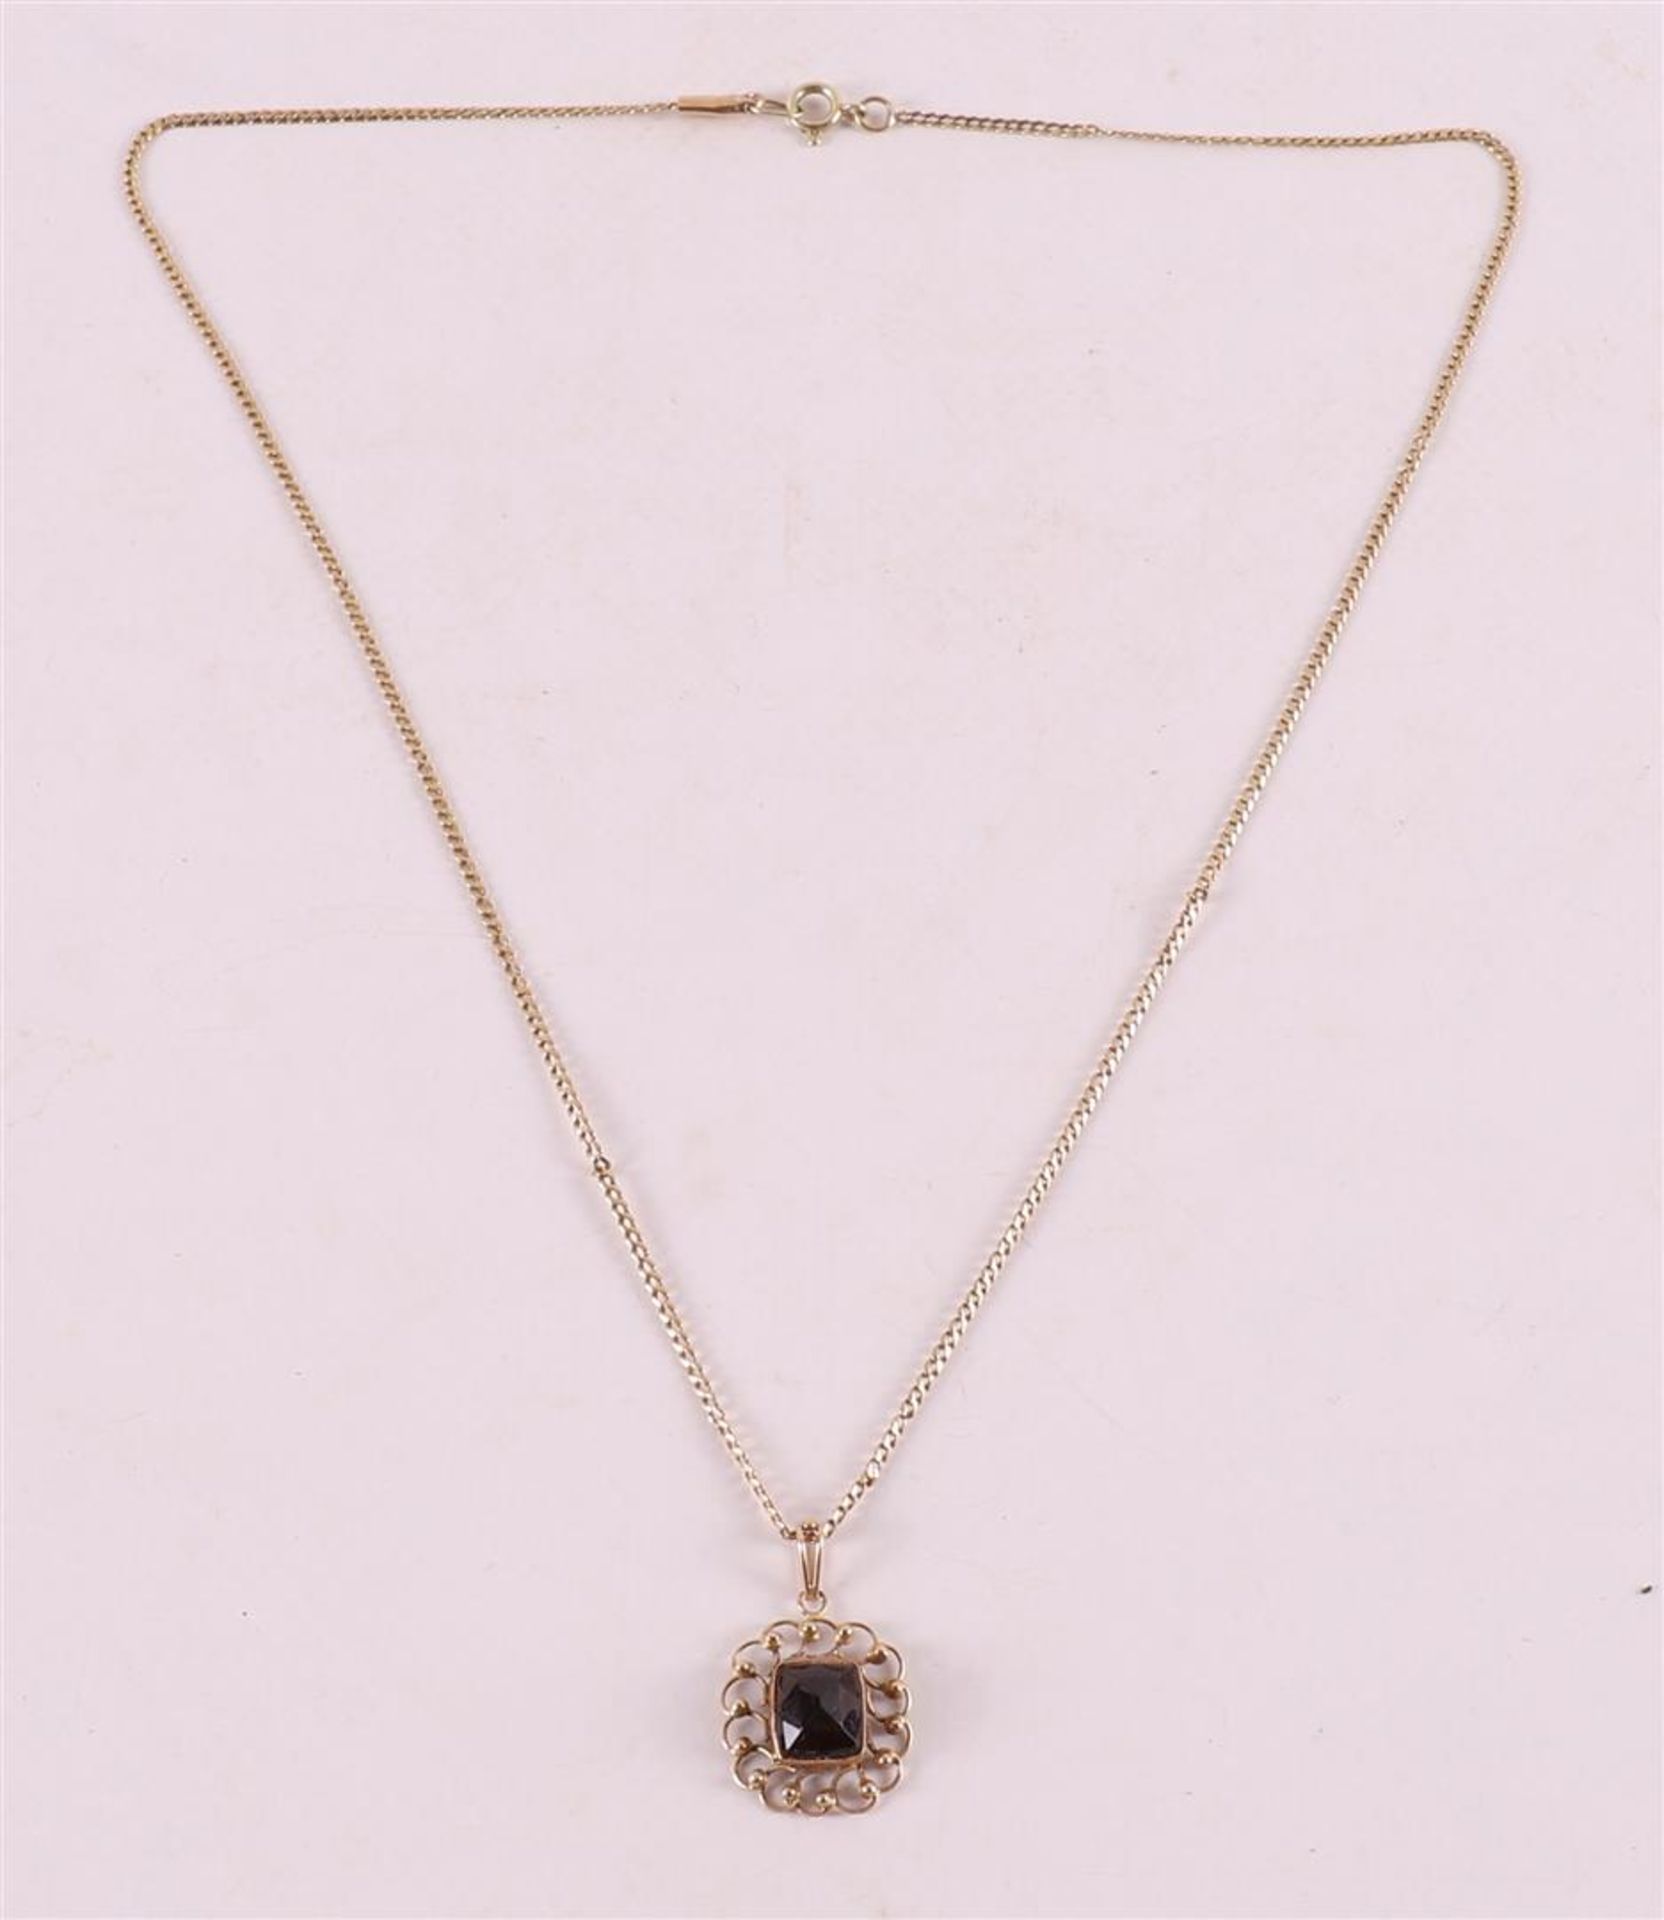 A 14 kt 585/1000 gold square pendant with garnet, on a gold necklace.